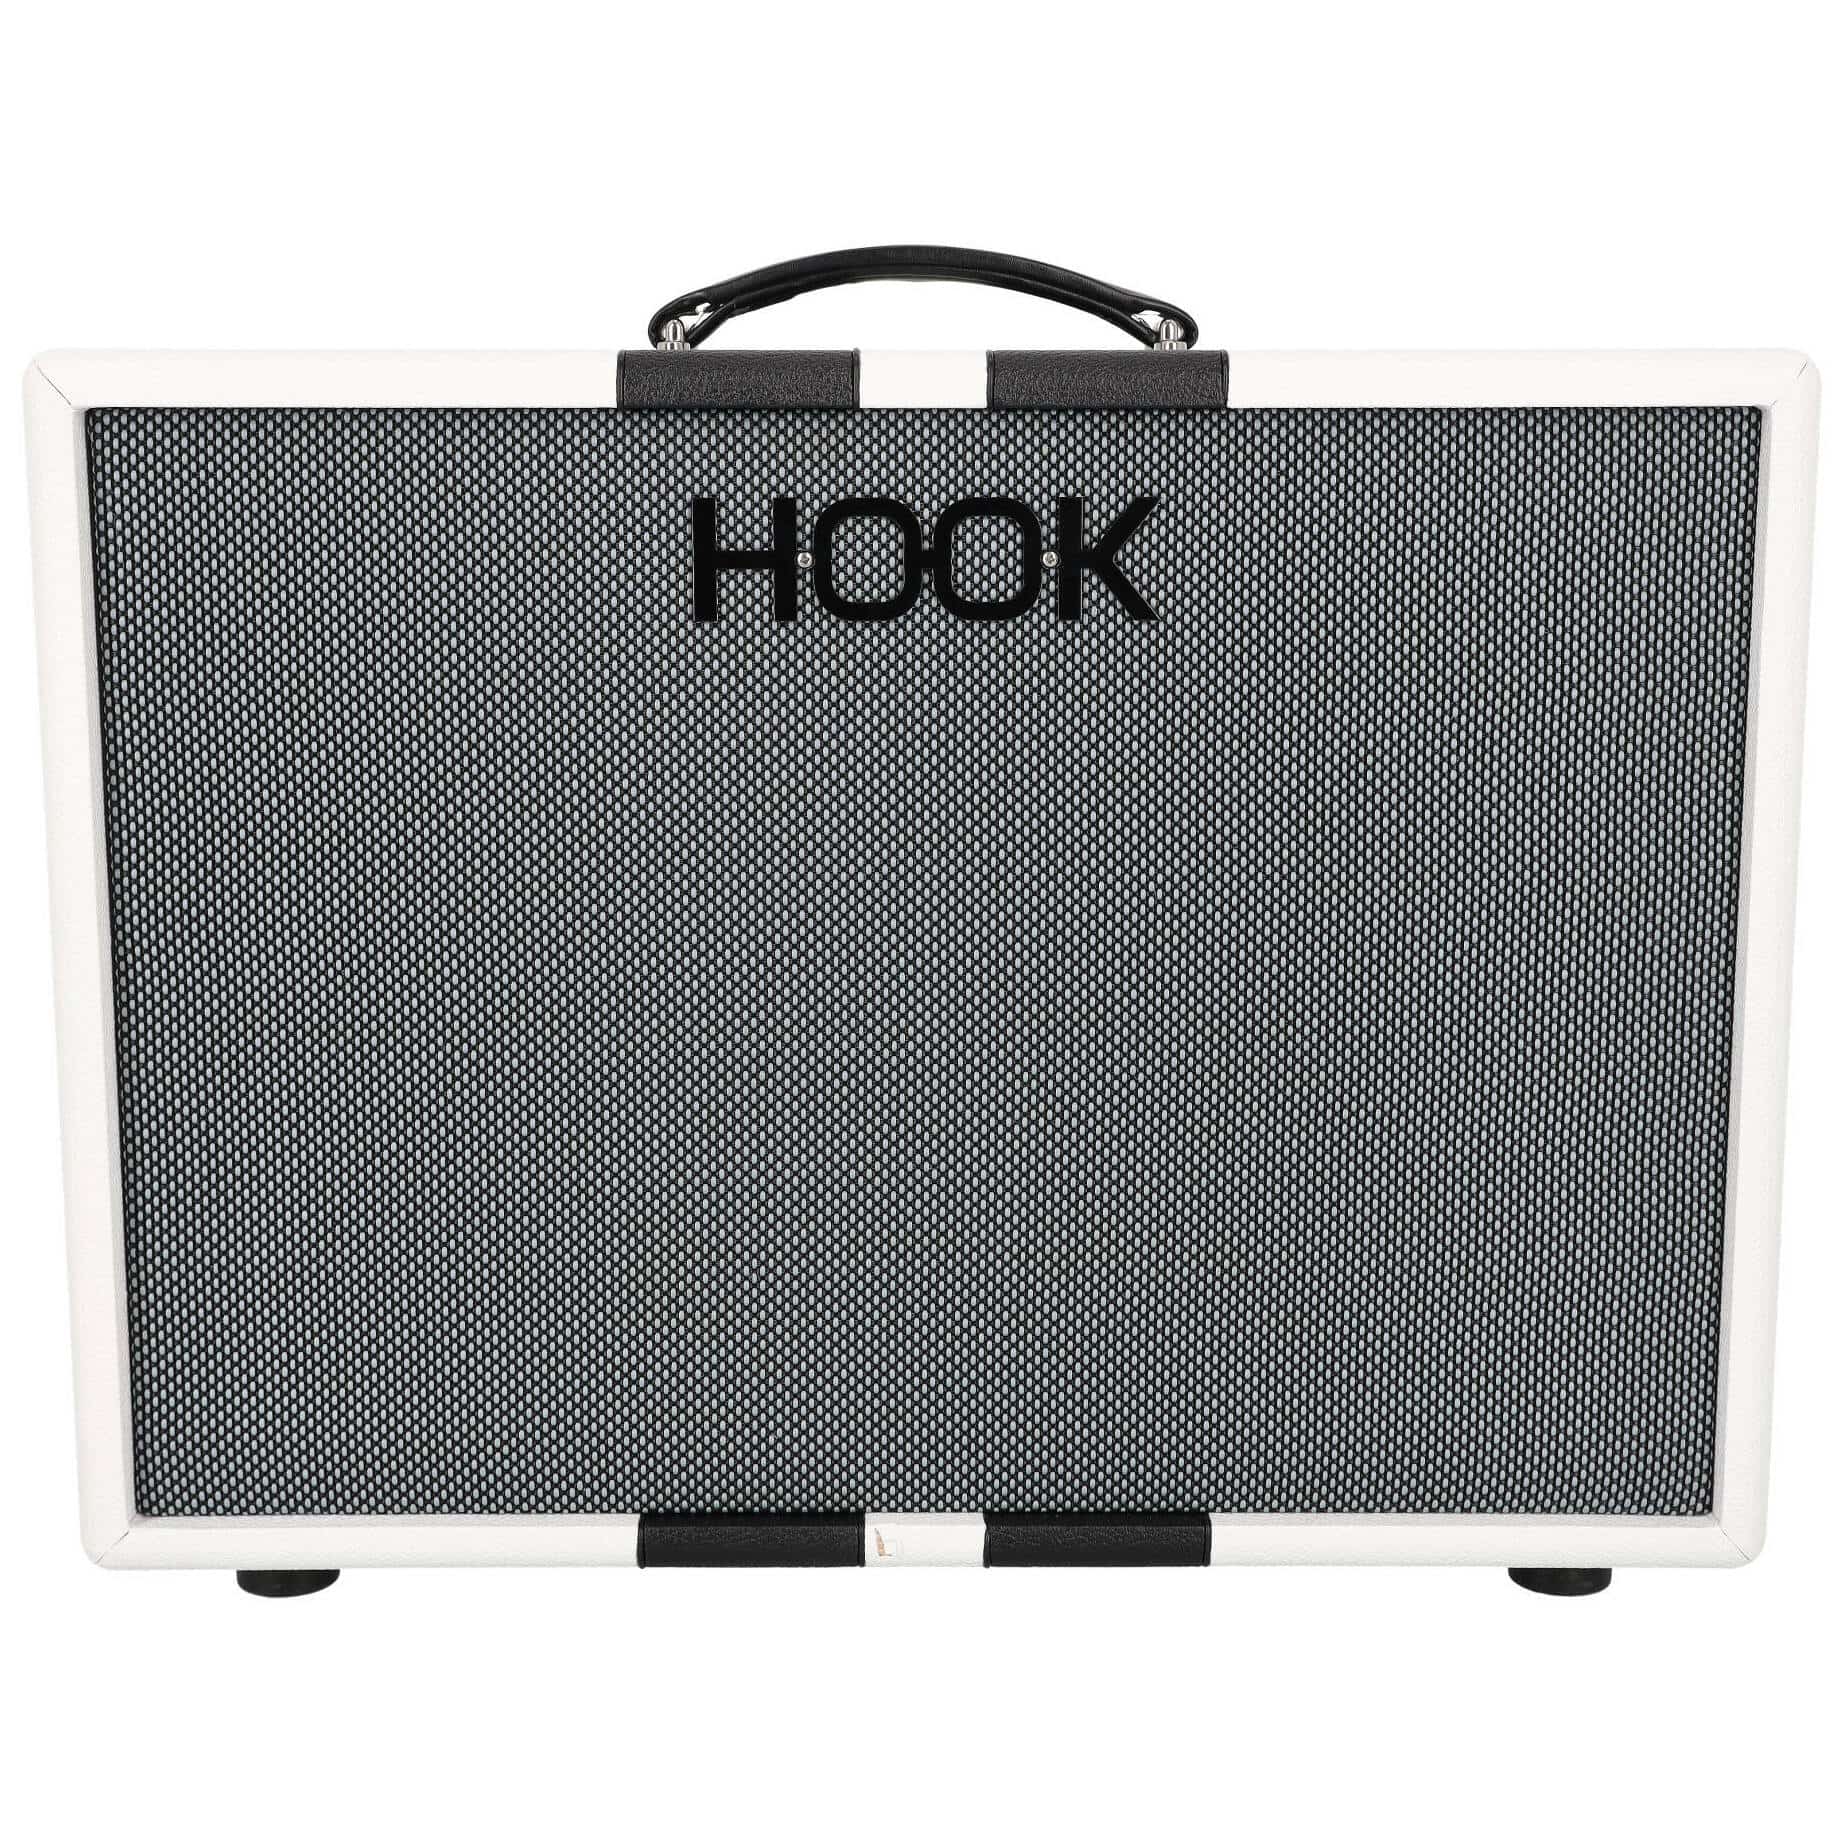 Hook Amplification 1x12 Wizard Cabinet WGS Oval White Black Stripes 2